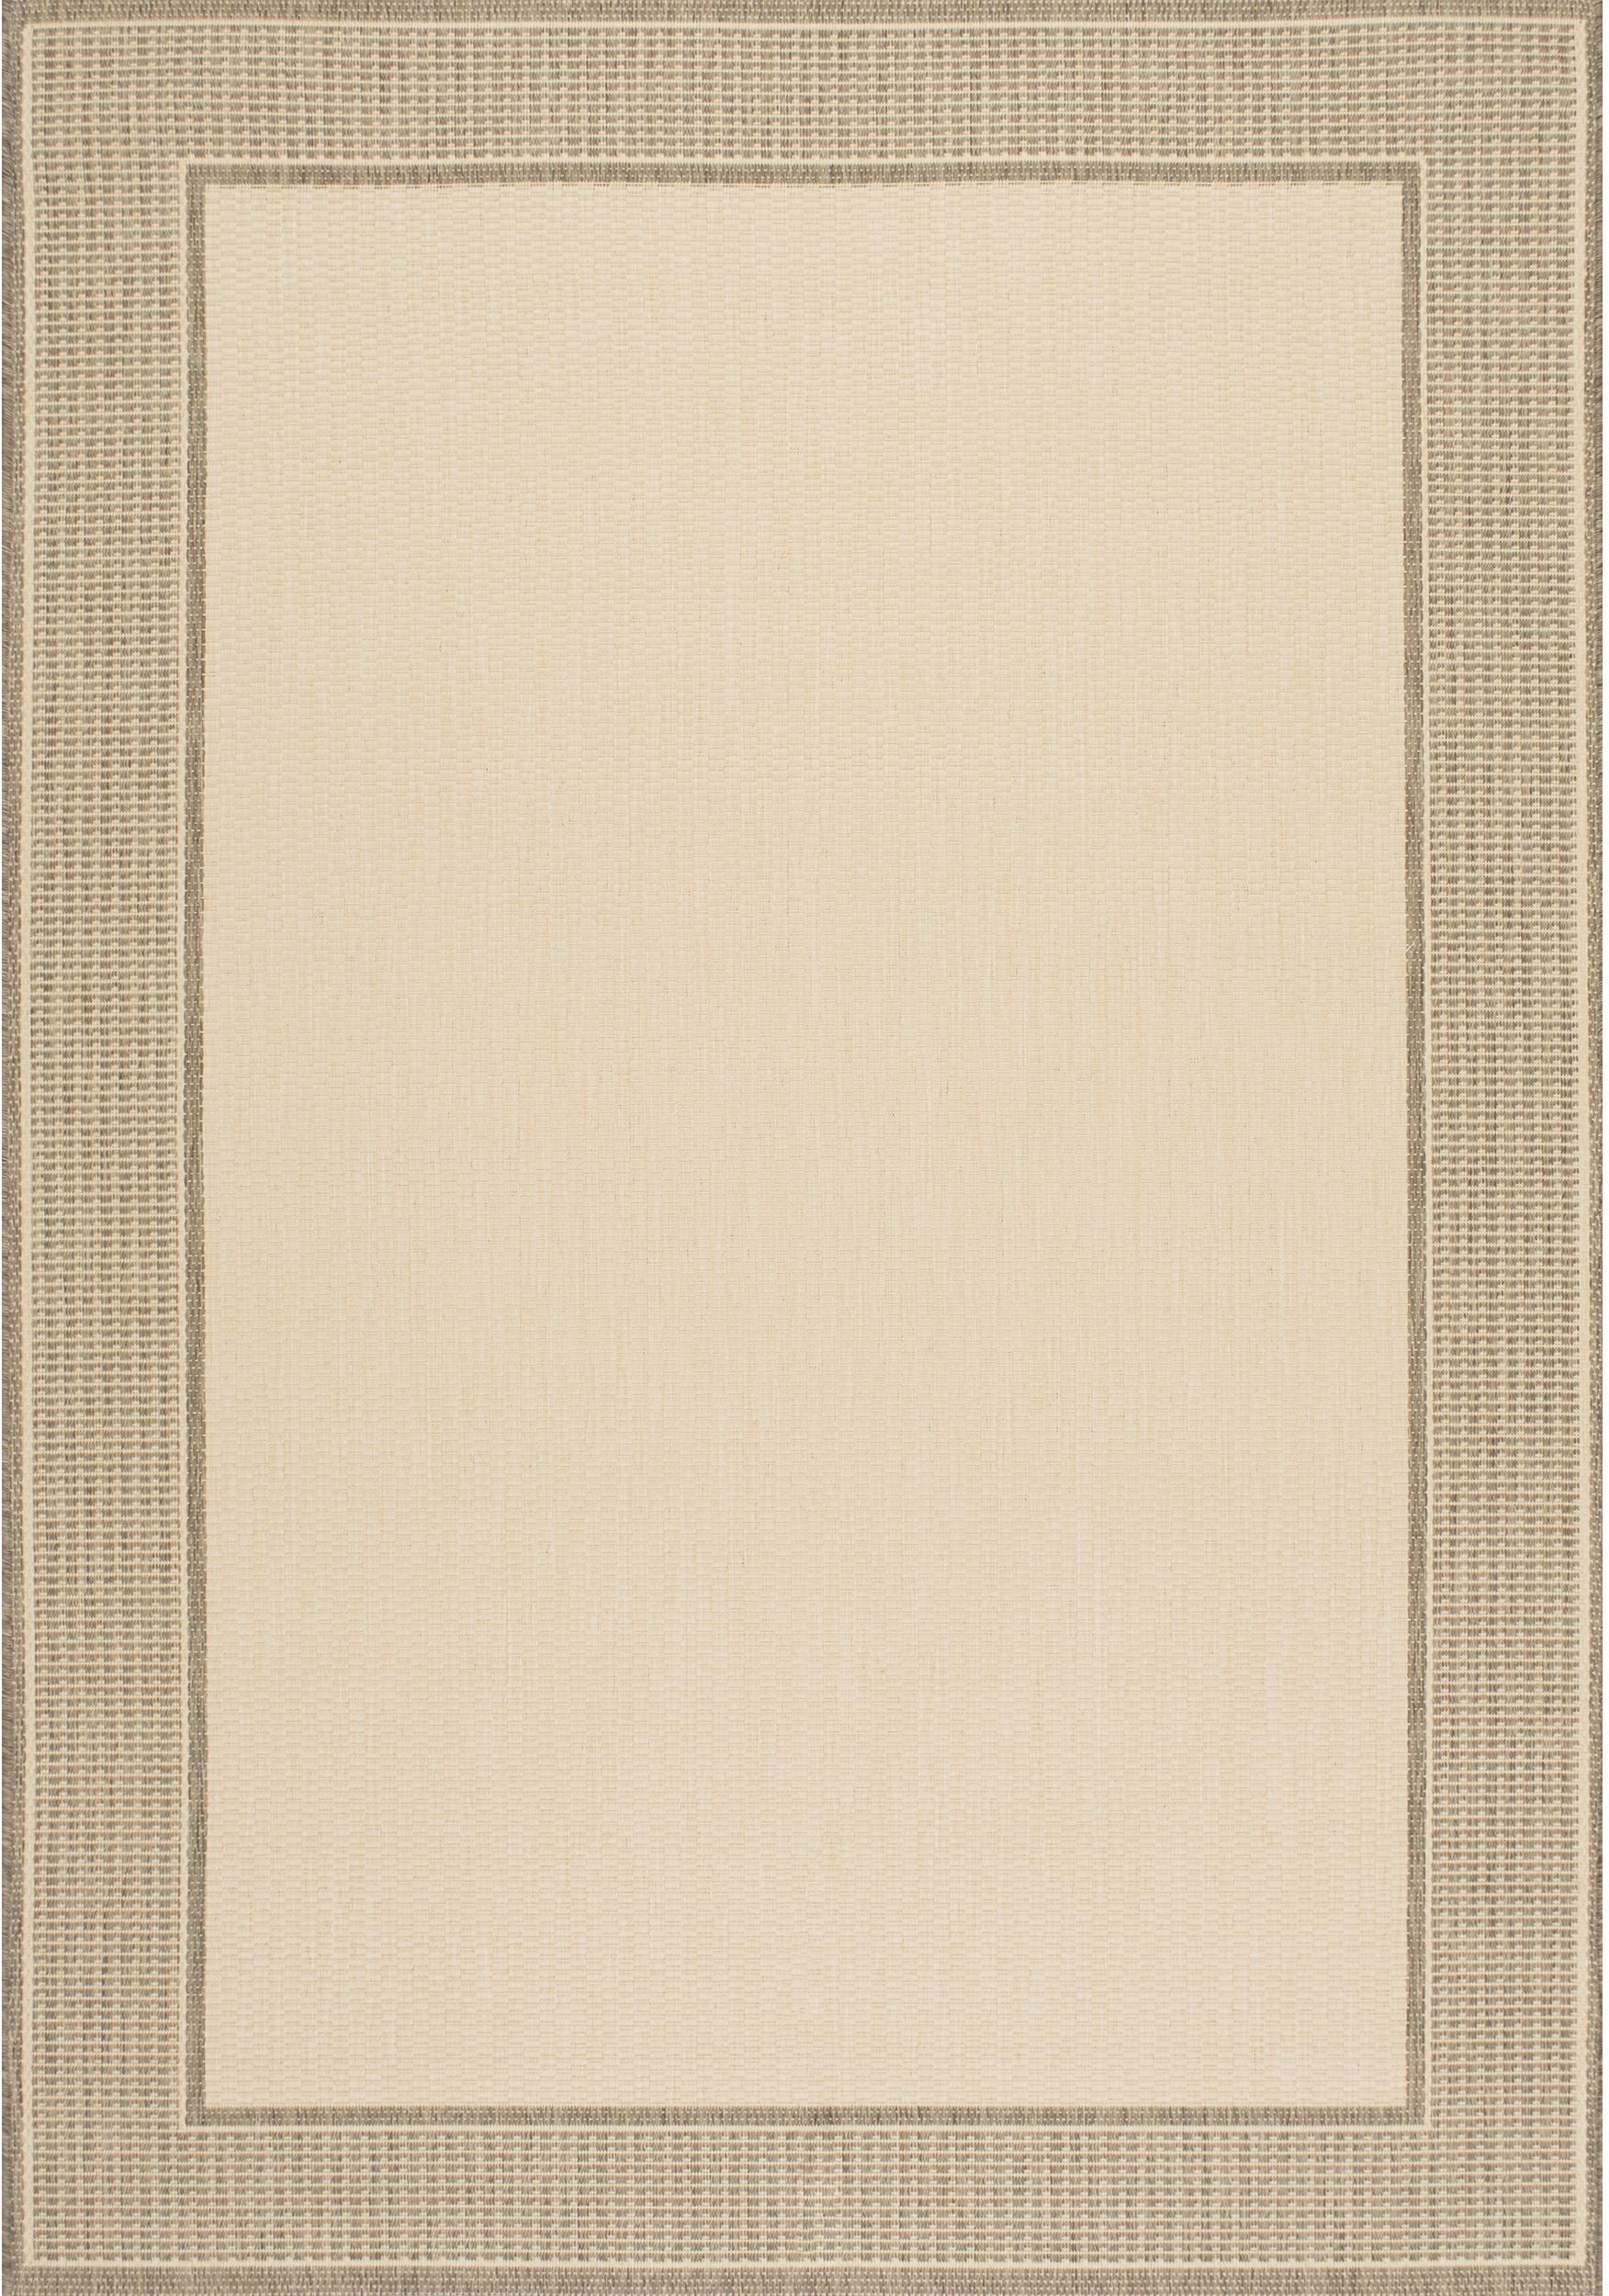 Nuloom Gris Contemporary Ngr2853A Beige Area Rug